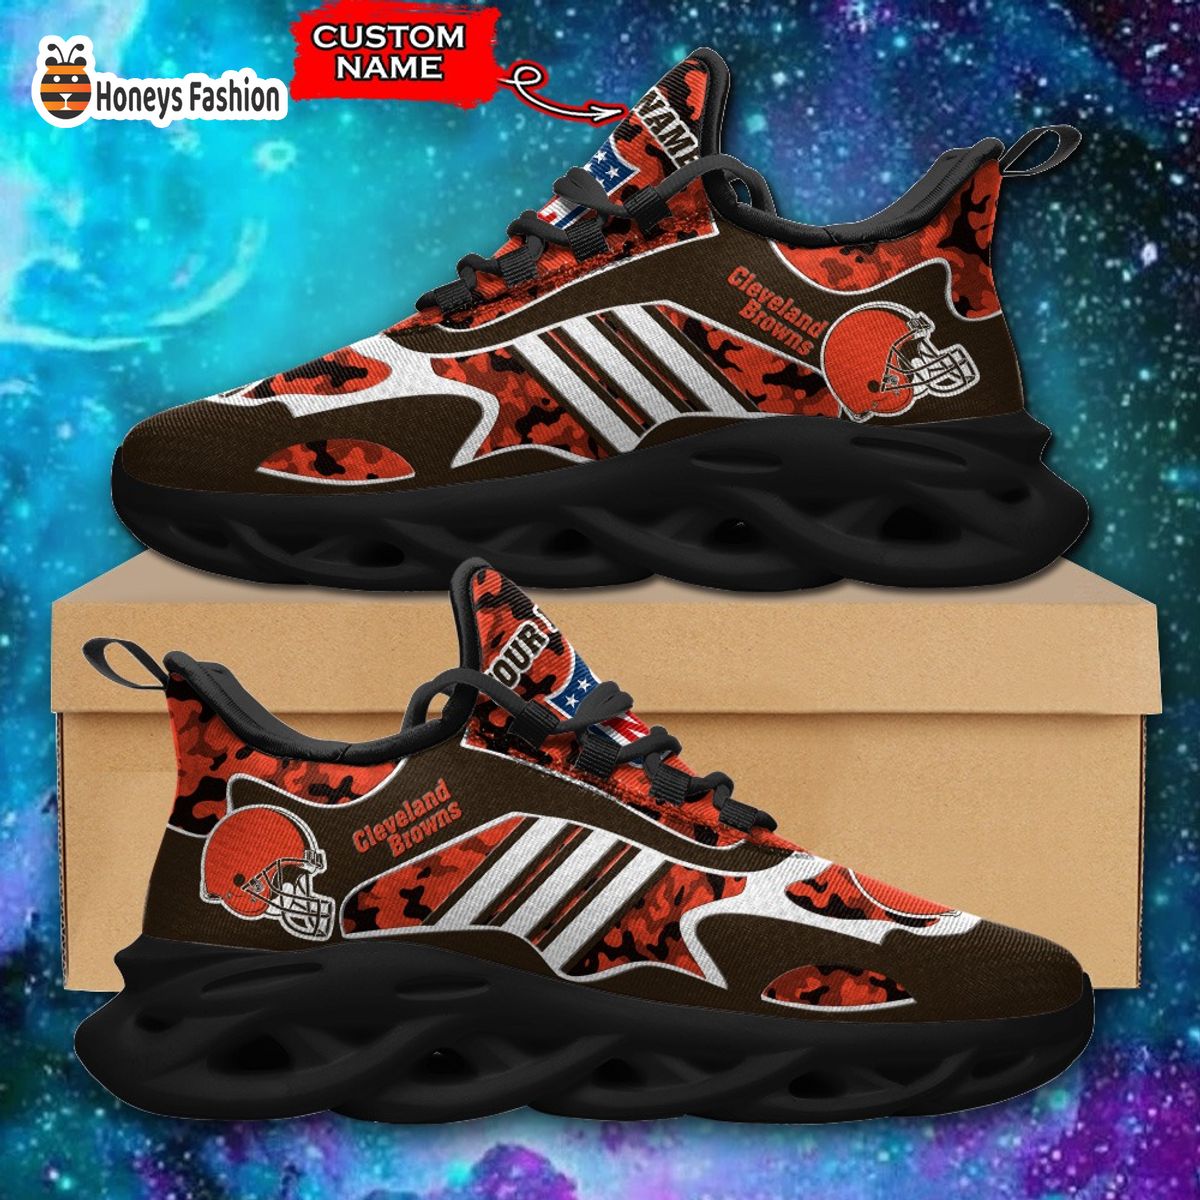 Cleveland Browns NFL Adidas Personalized Max Soul Shoes